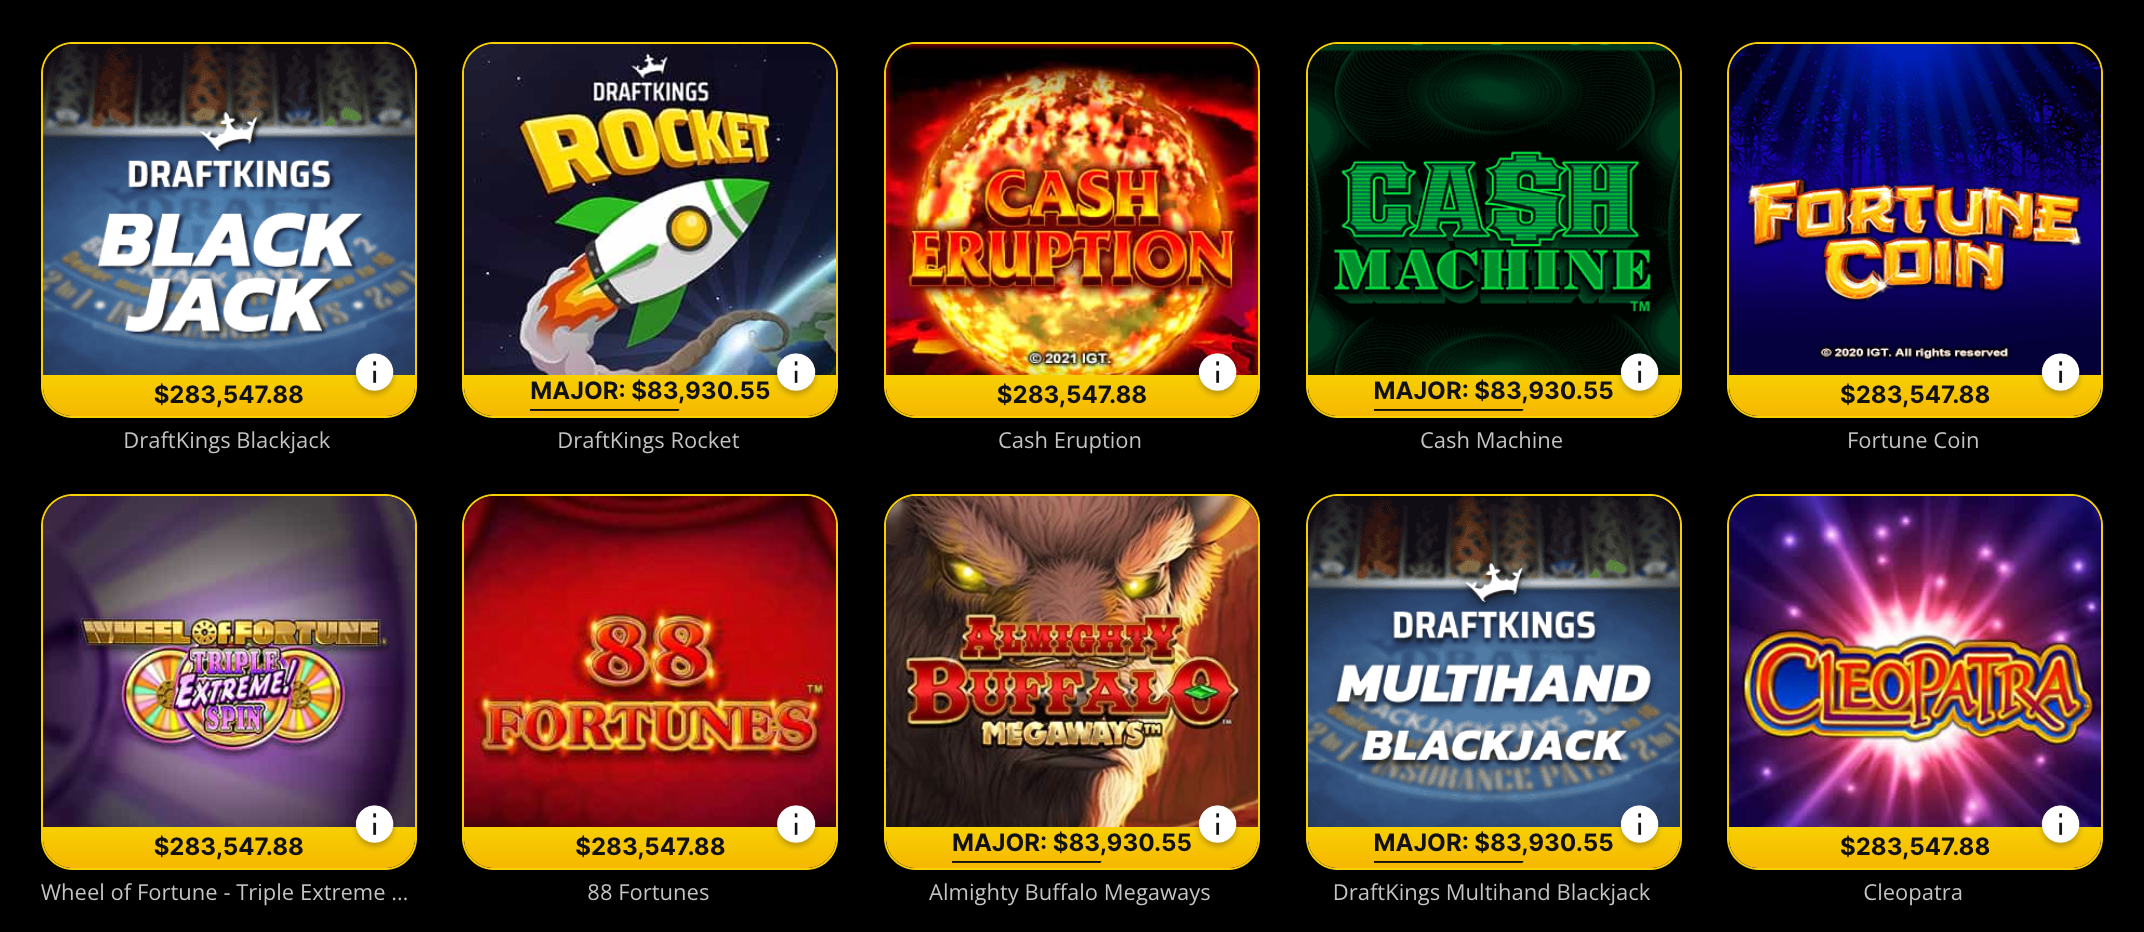 Desktop view of the DraftKings Casino game collection.